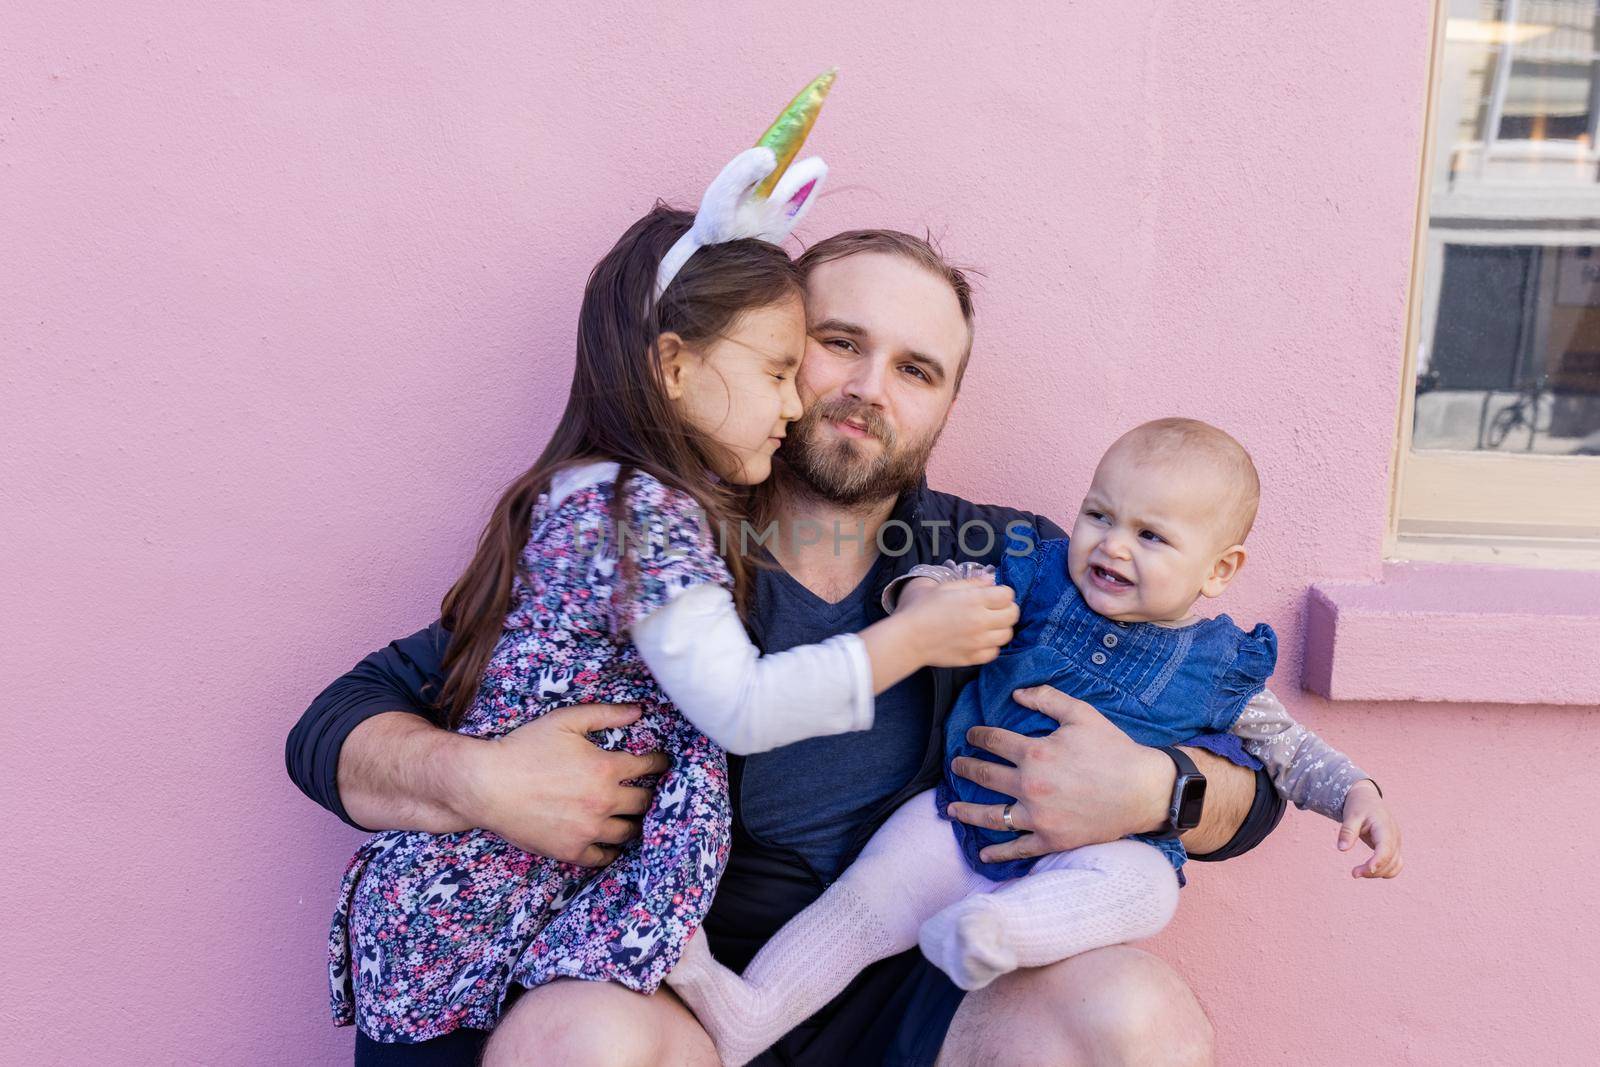 Portrait of young father hugging his adorable baby and older daughter in front of a pink wall. Bearded man in squatting position holding baby and little girl. Happy family outdoors